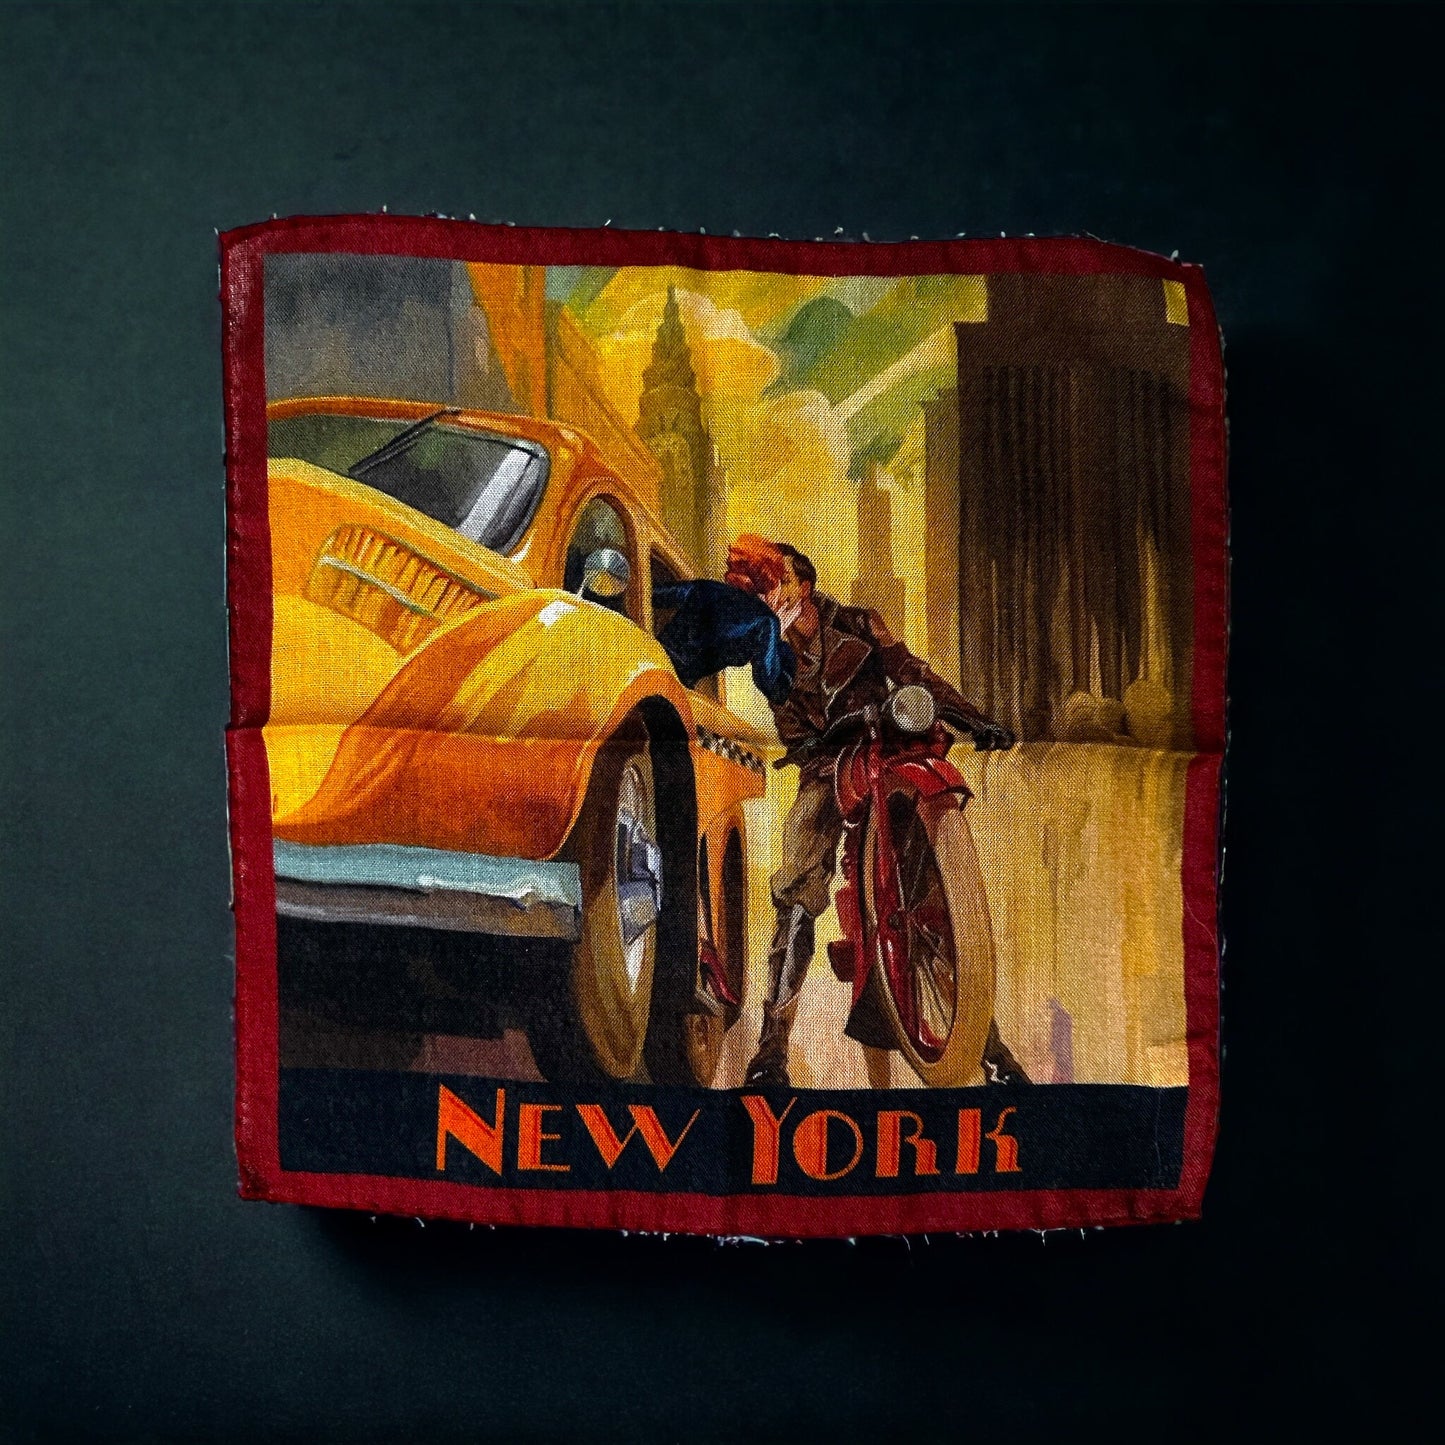 New designs in beautiful and colorful pocket square for your new sport jacket or suit. Adding color and casualness to any outfit these pocket squares depict different exotic cities across the world. Here we have vintage New York City through the eyes of artist Kai Carpenter. Hand rolled edge. Made in Italy. 14 x14 inches.